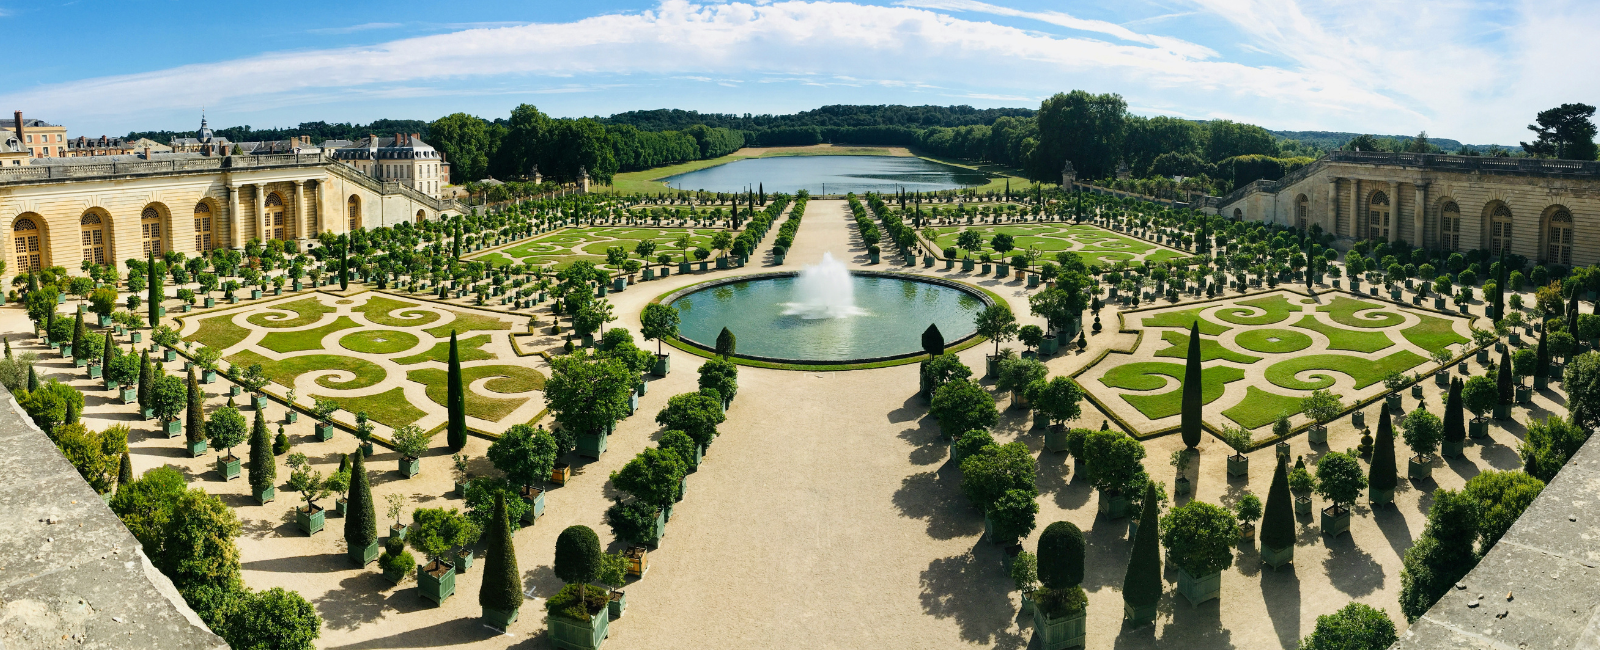 Panoramic view of Palace of Versailles gardens